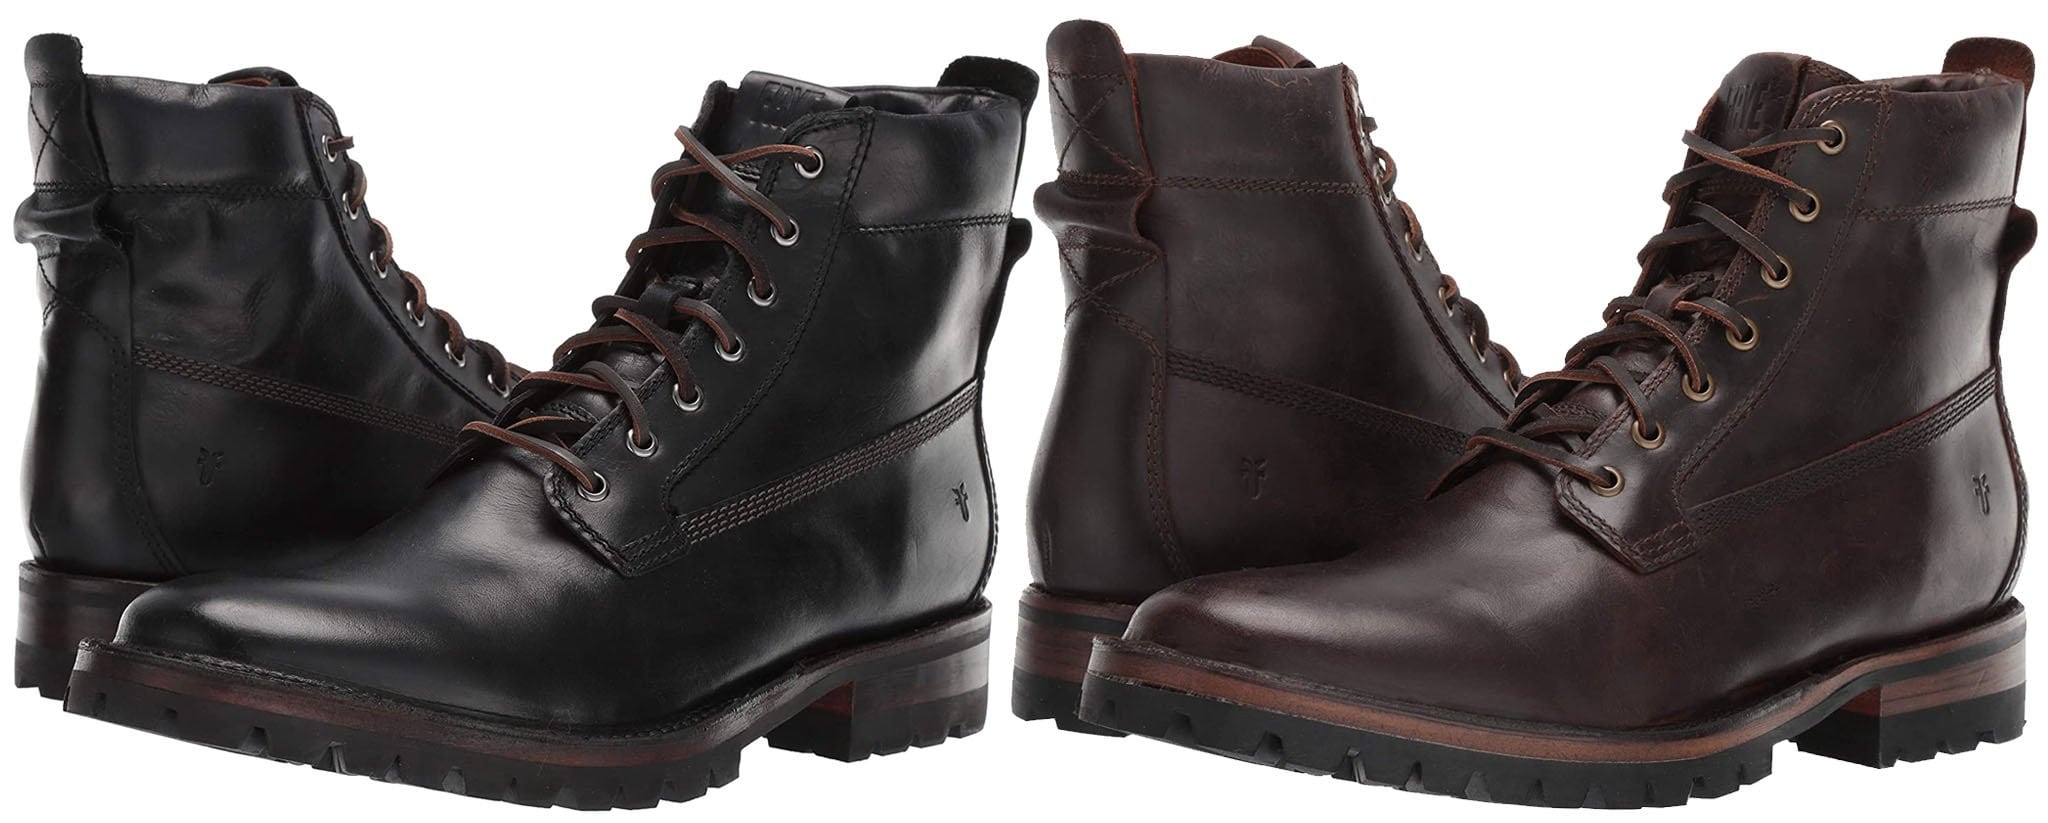 Durable and versatile, the Frye Union Workboots are made from pull-up leather with a weather-proof finish set on rubber lug soles with Goodyear-welt construction